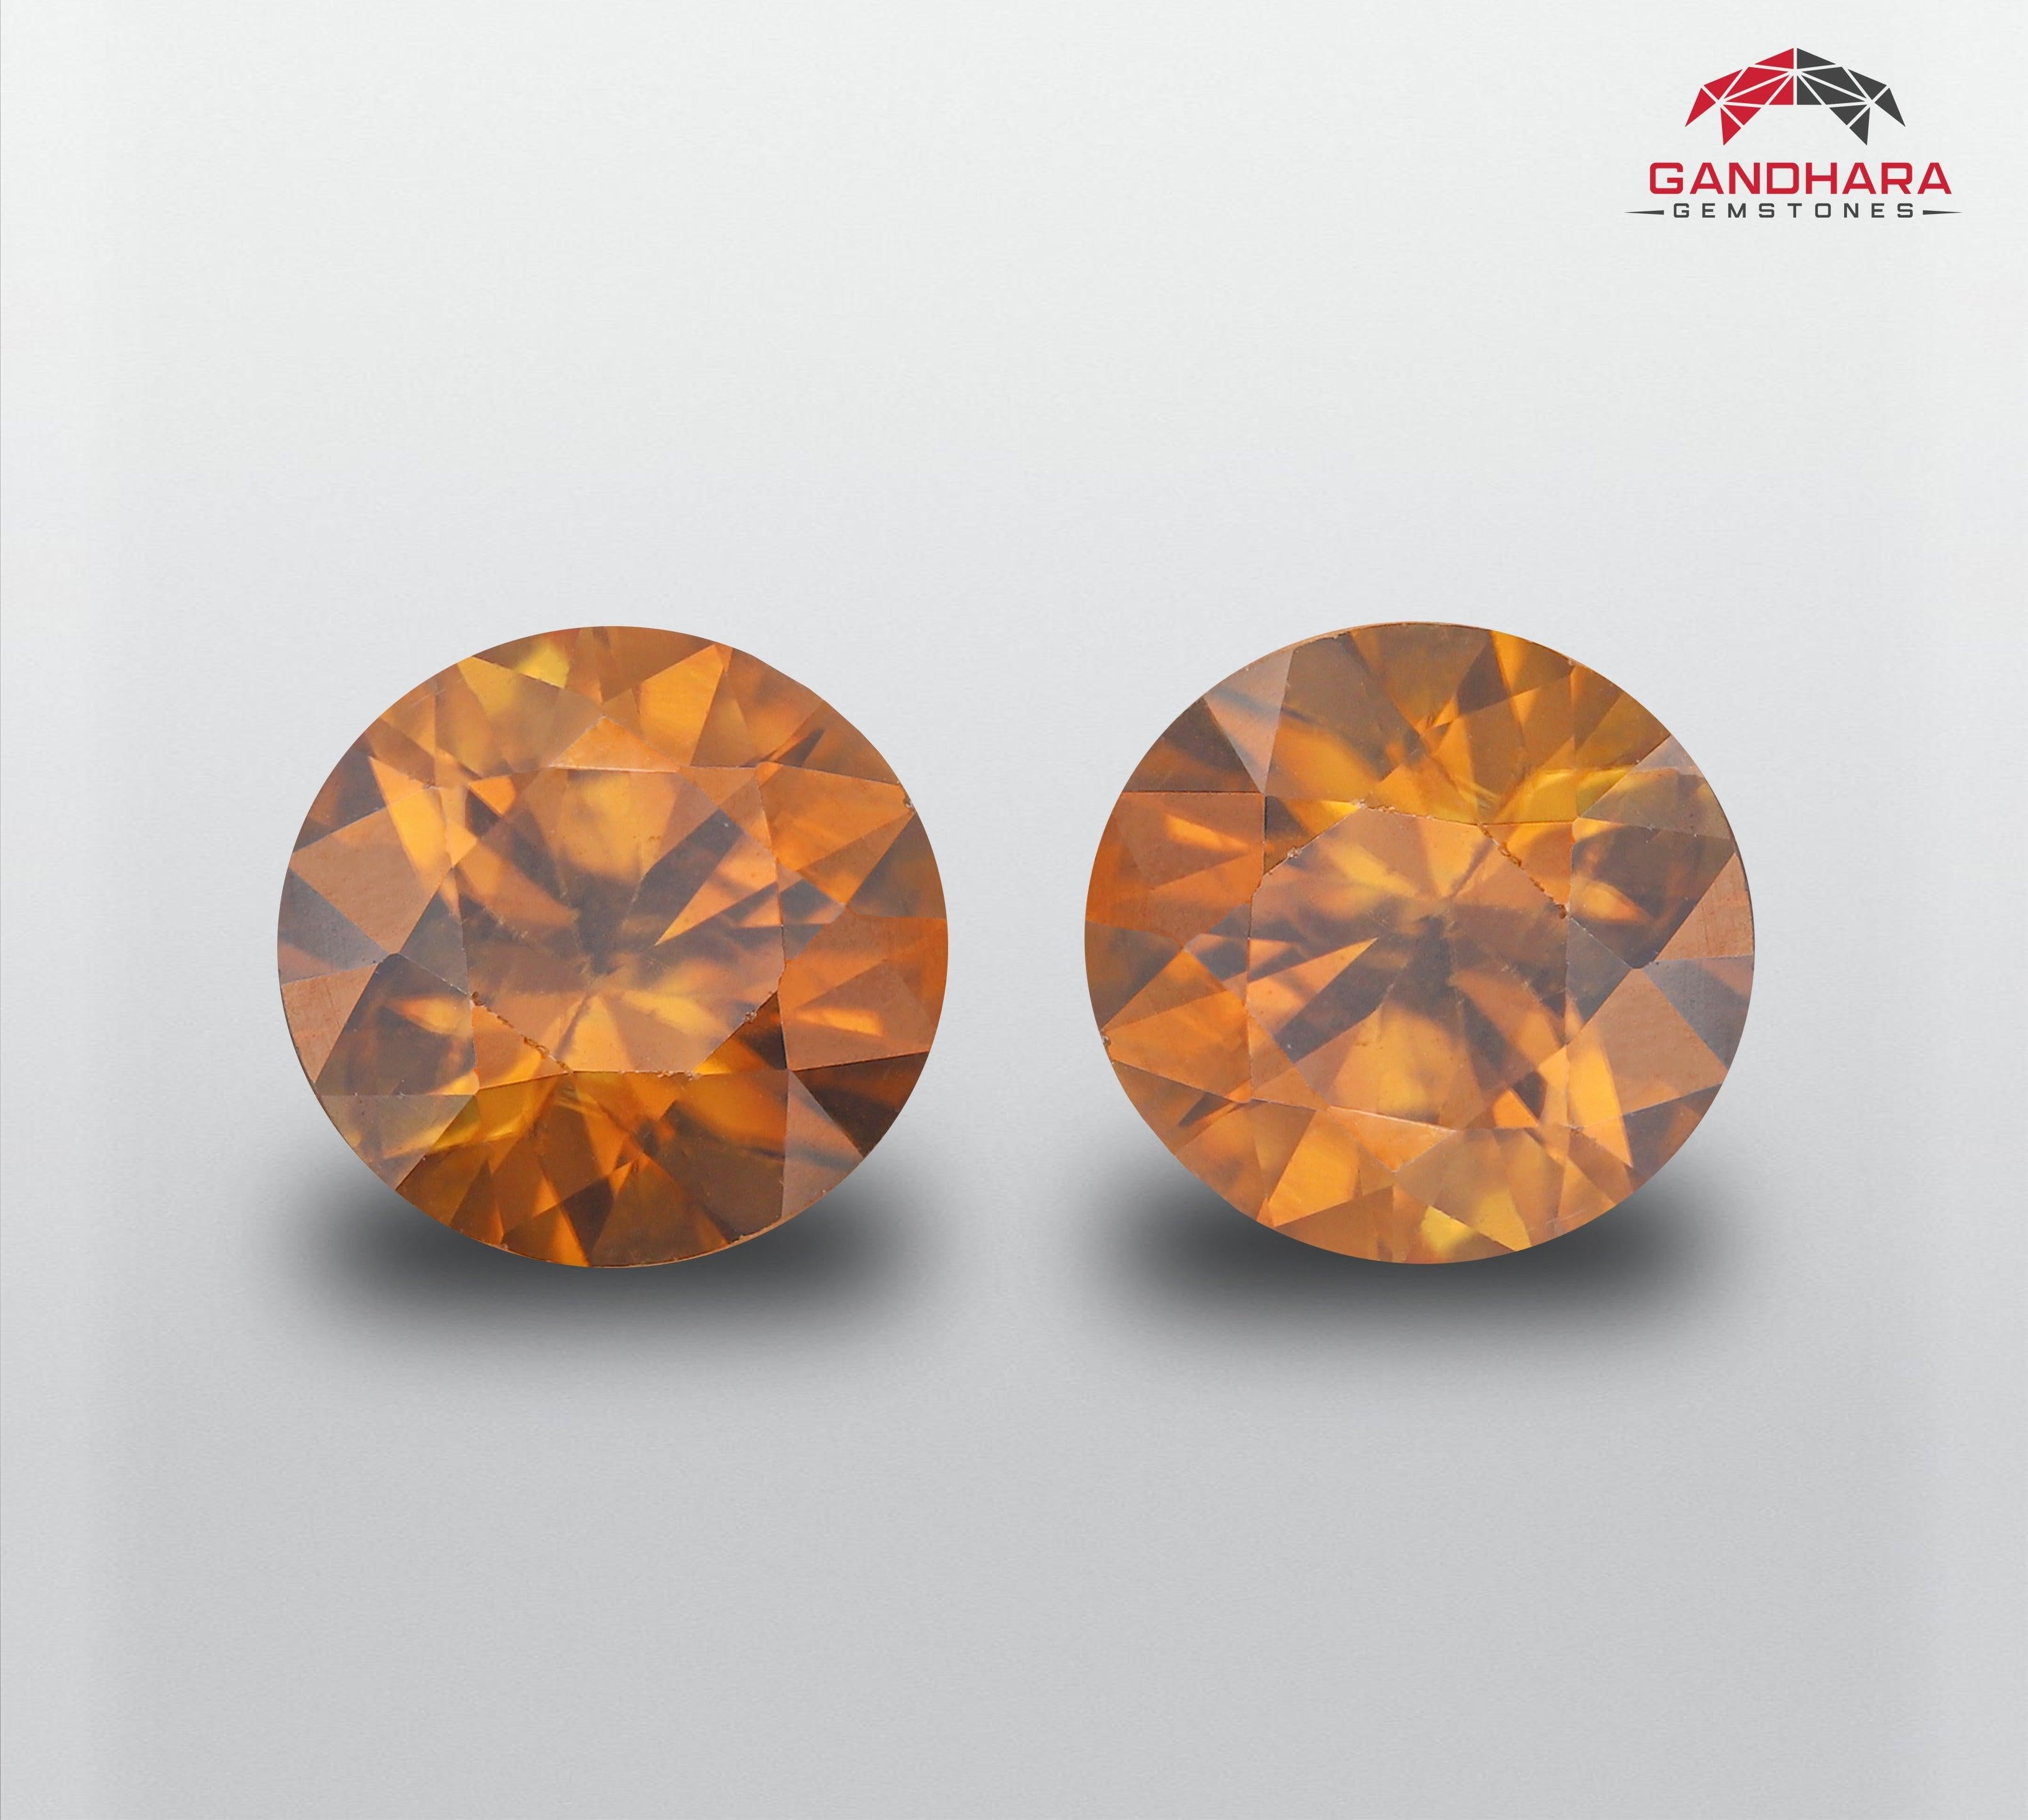 Yellowish Golden Natural Zircon Pair, available for sale at wholesale price, natural high quality 3.60 carats(1.74 carats each)  VVS clarity, certified Zircon from Combodia.

Product Information:
GEMSTONE NAME	Natural Round Zircons Lot
WEIGHT	3.60